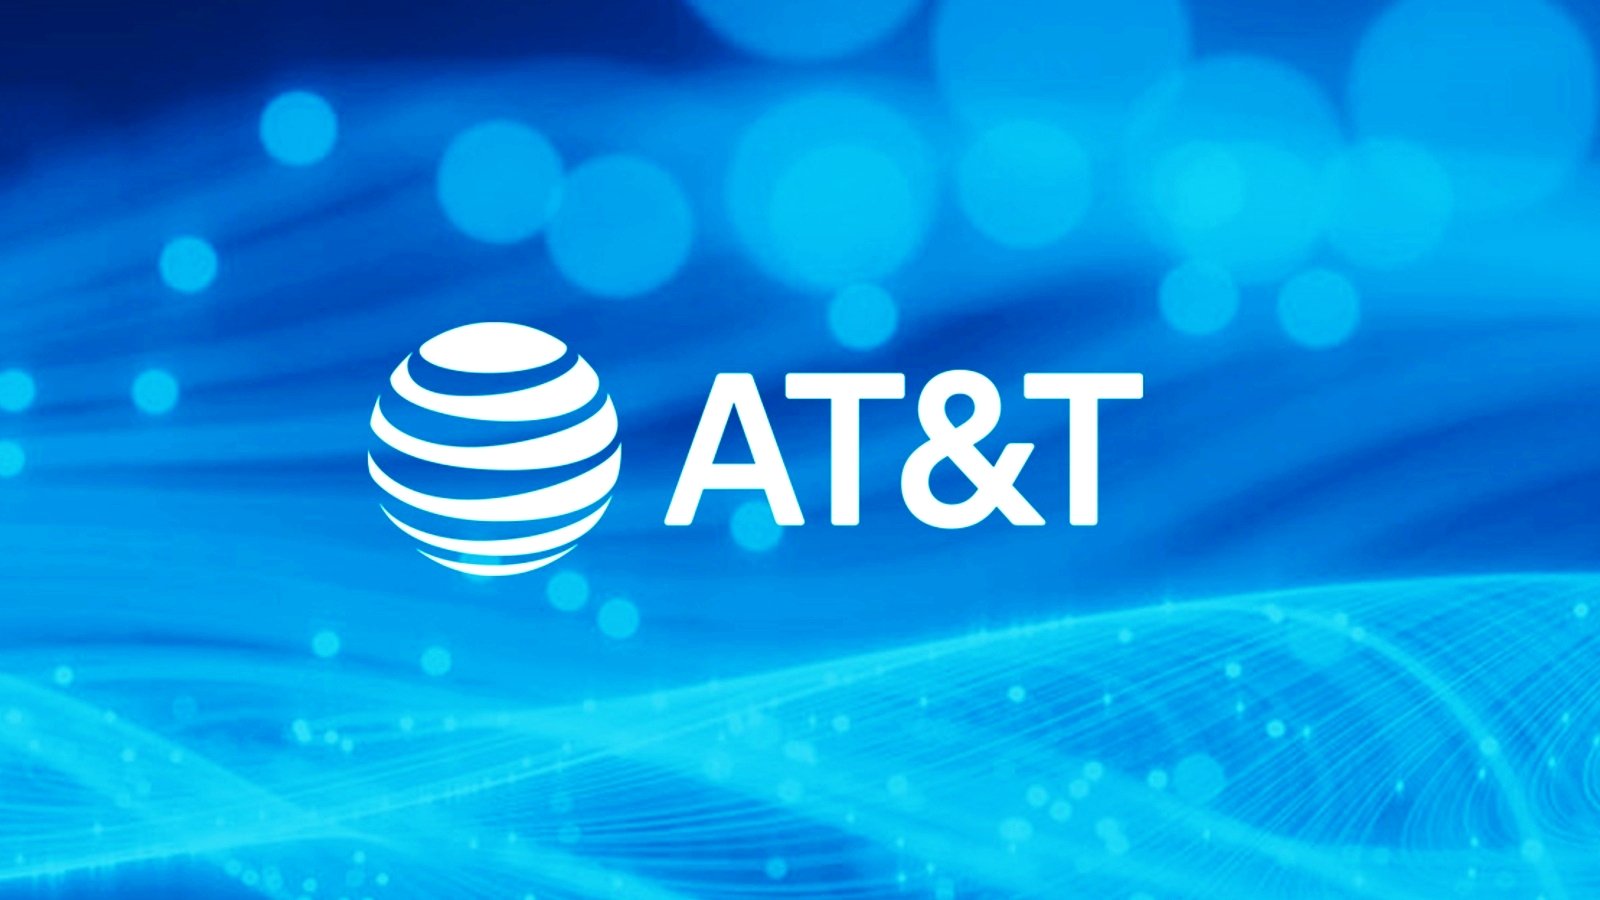 AT&T lost $200M in seven years to illegal phone unlocking scheme